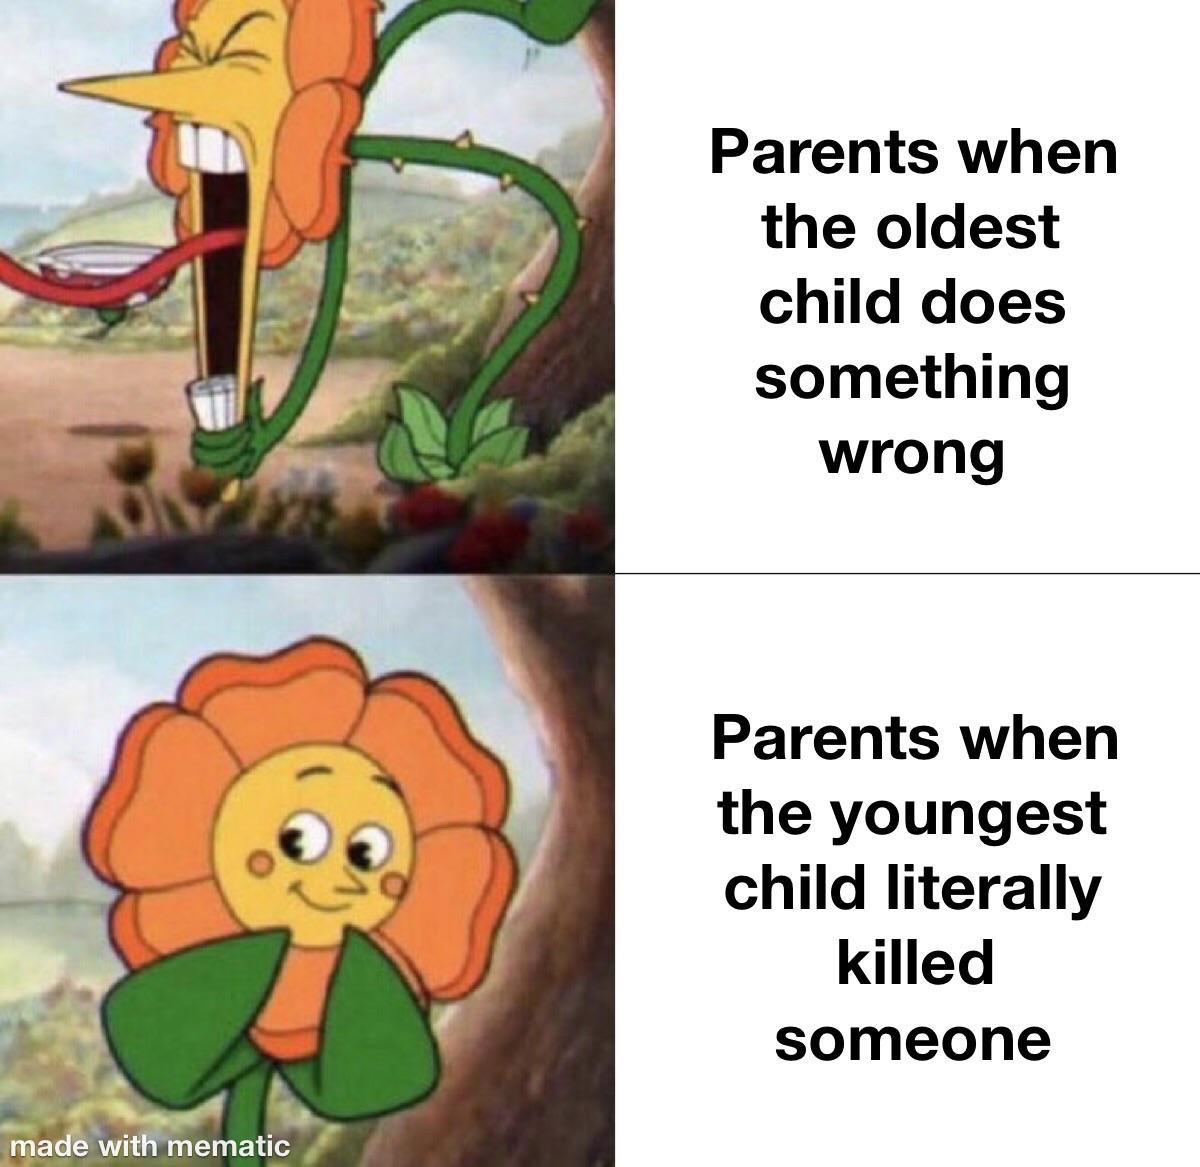 cagney carnation meme - Parents when the oldest child does something wrong Parents when the youngest child literally killed someone made with mematic